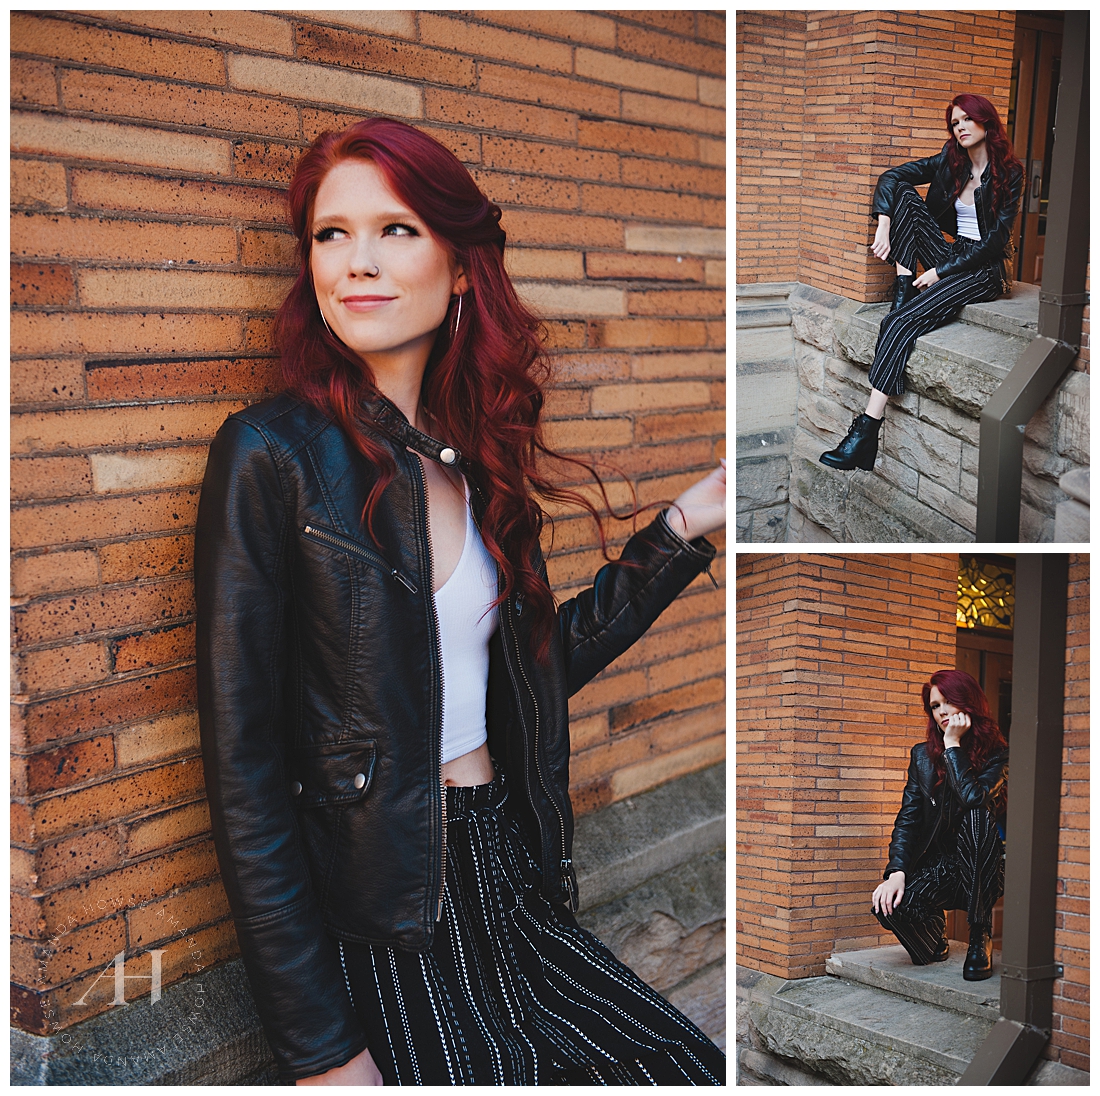 Cute Senior Portraits with Brick Wall | The Best Outfits for Senior Portraits, How to Style a Leather Jacket | Photographed by Tacoma's Best Senior Portrait Photographer Amanda Howse